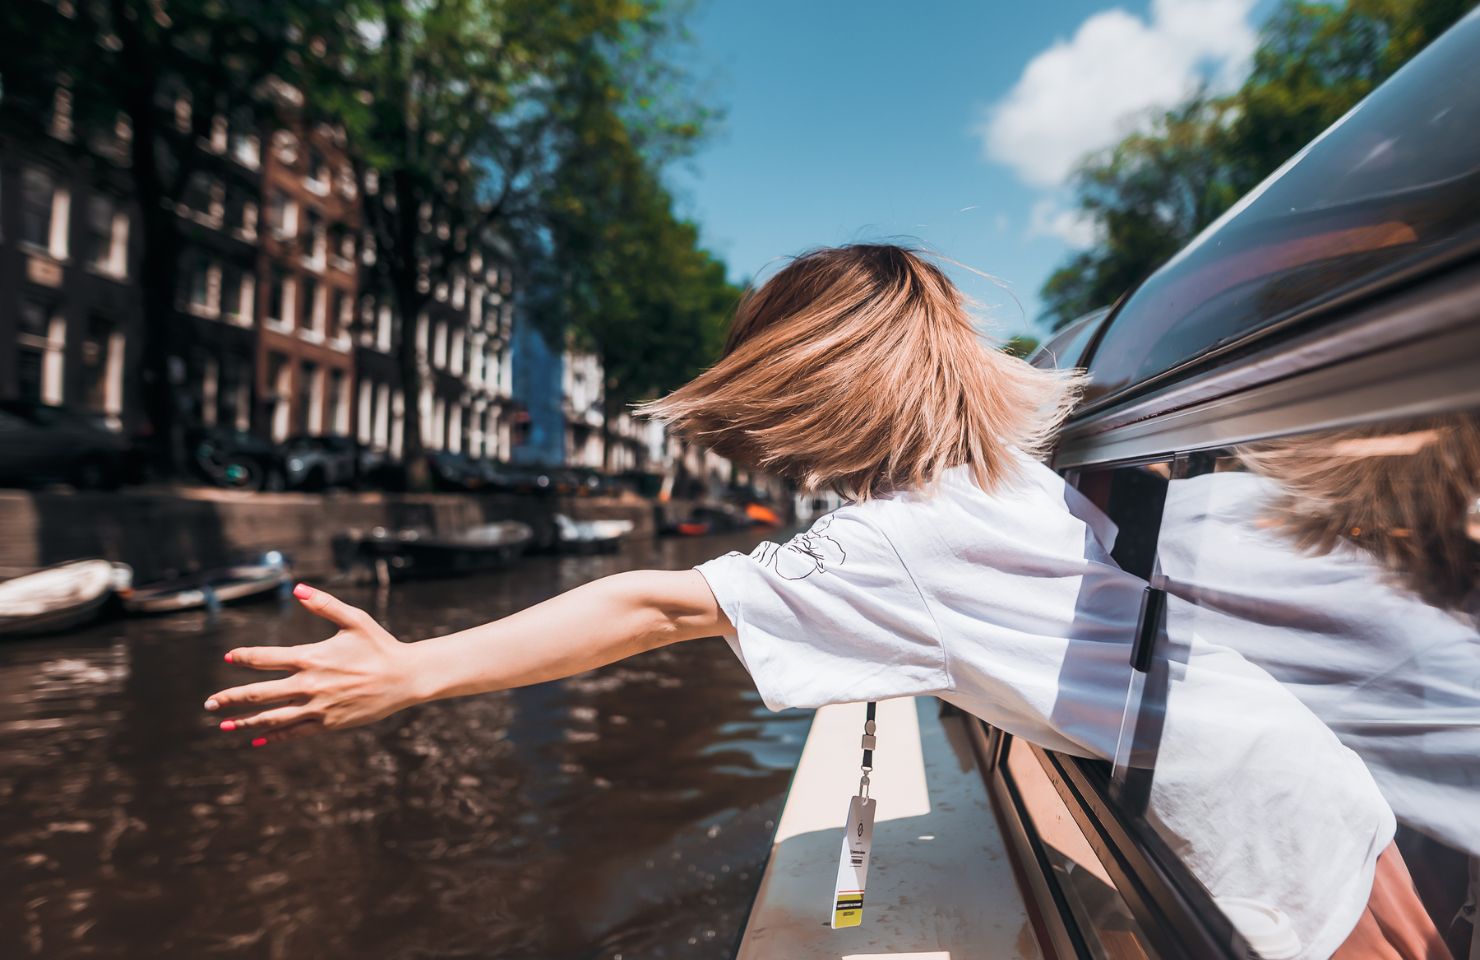 Girl Reaching Out of A Boat on The Canals Of Amsterdam